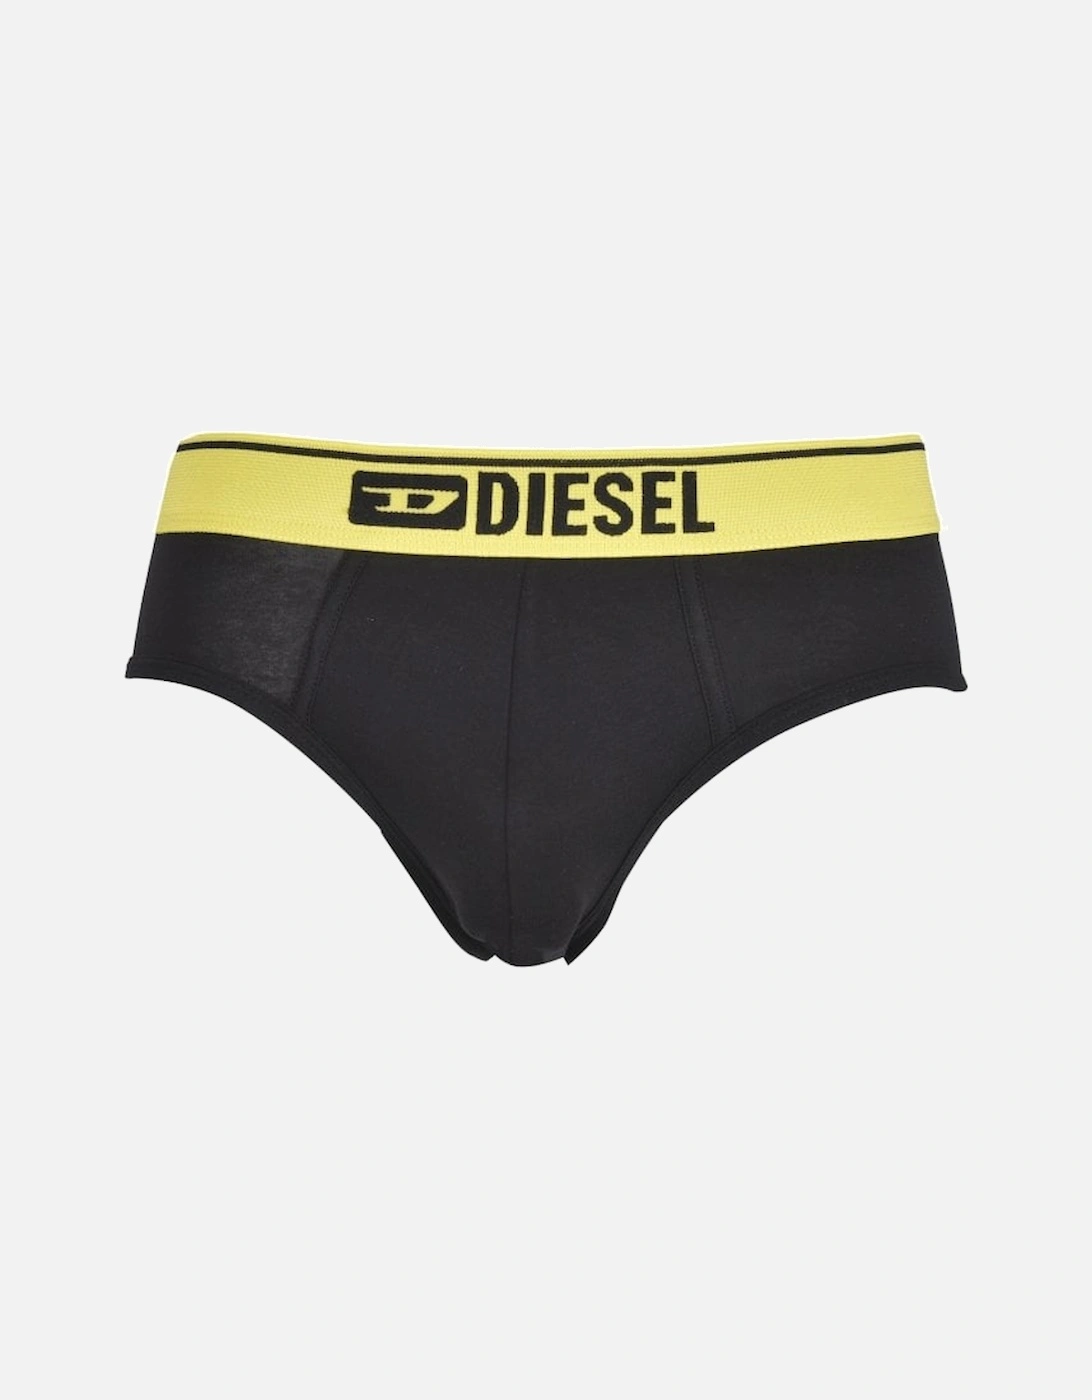 3-Pack Denim Division Briefs, Black with red/yellow/blue